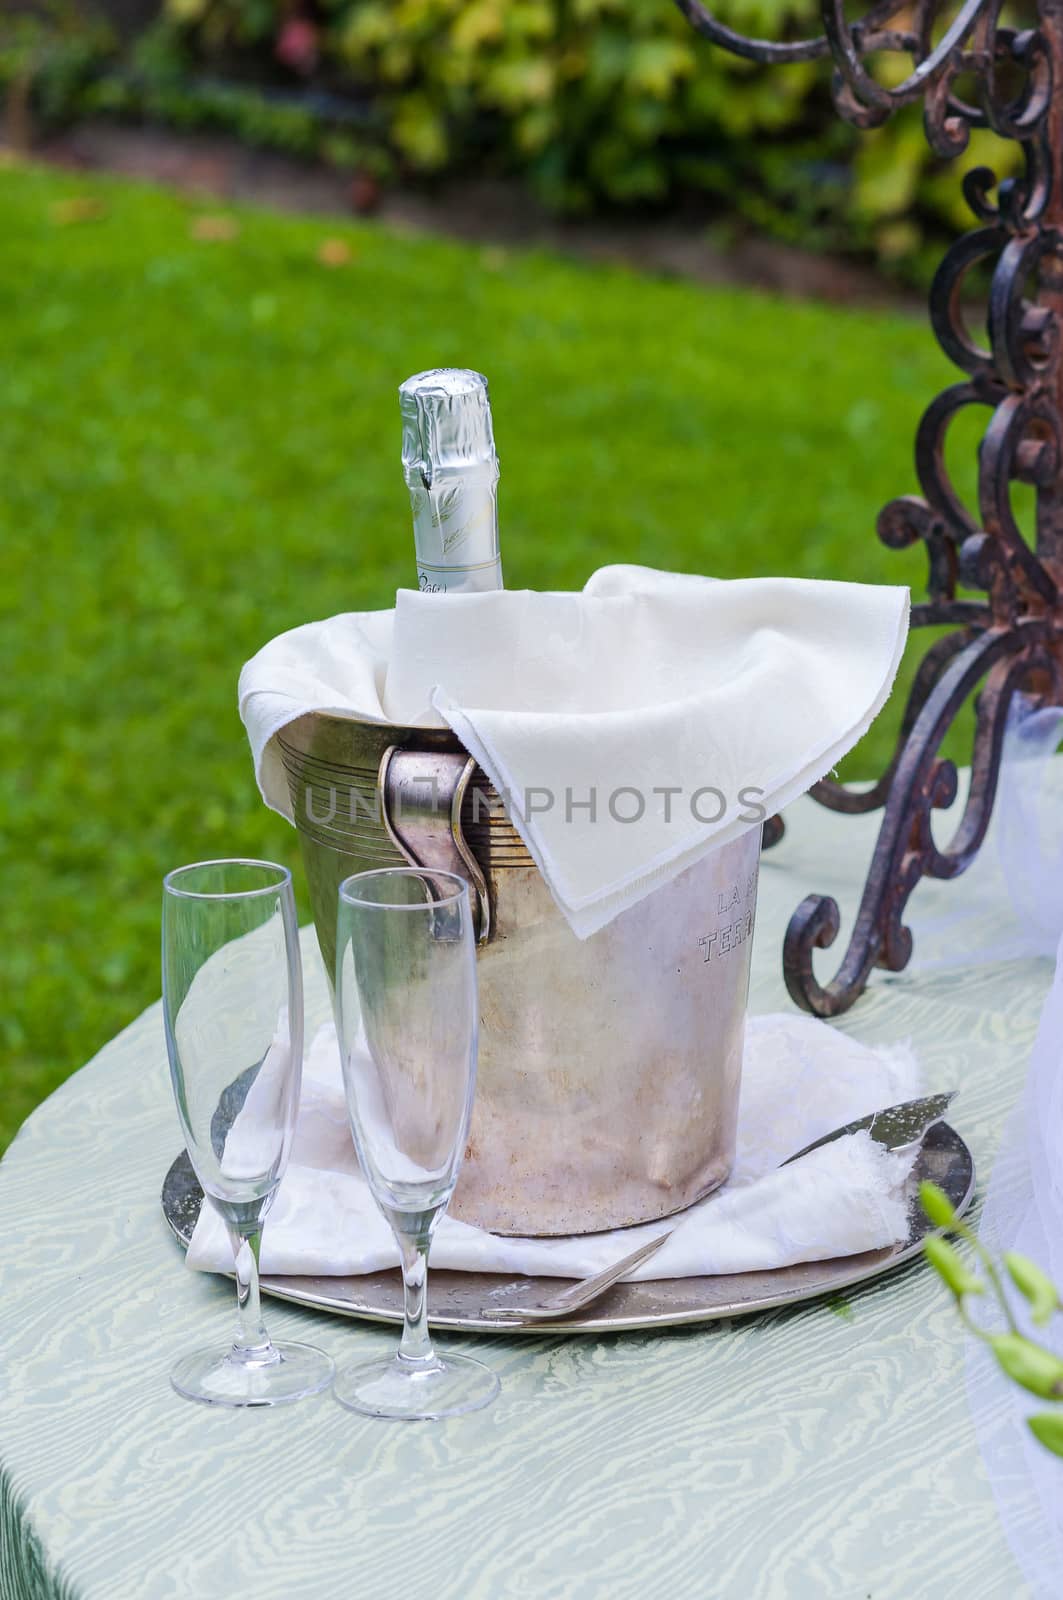 Two stem glasses and a spumante bottle for a toast during a wedding